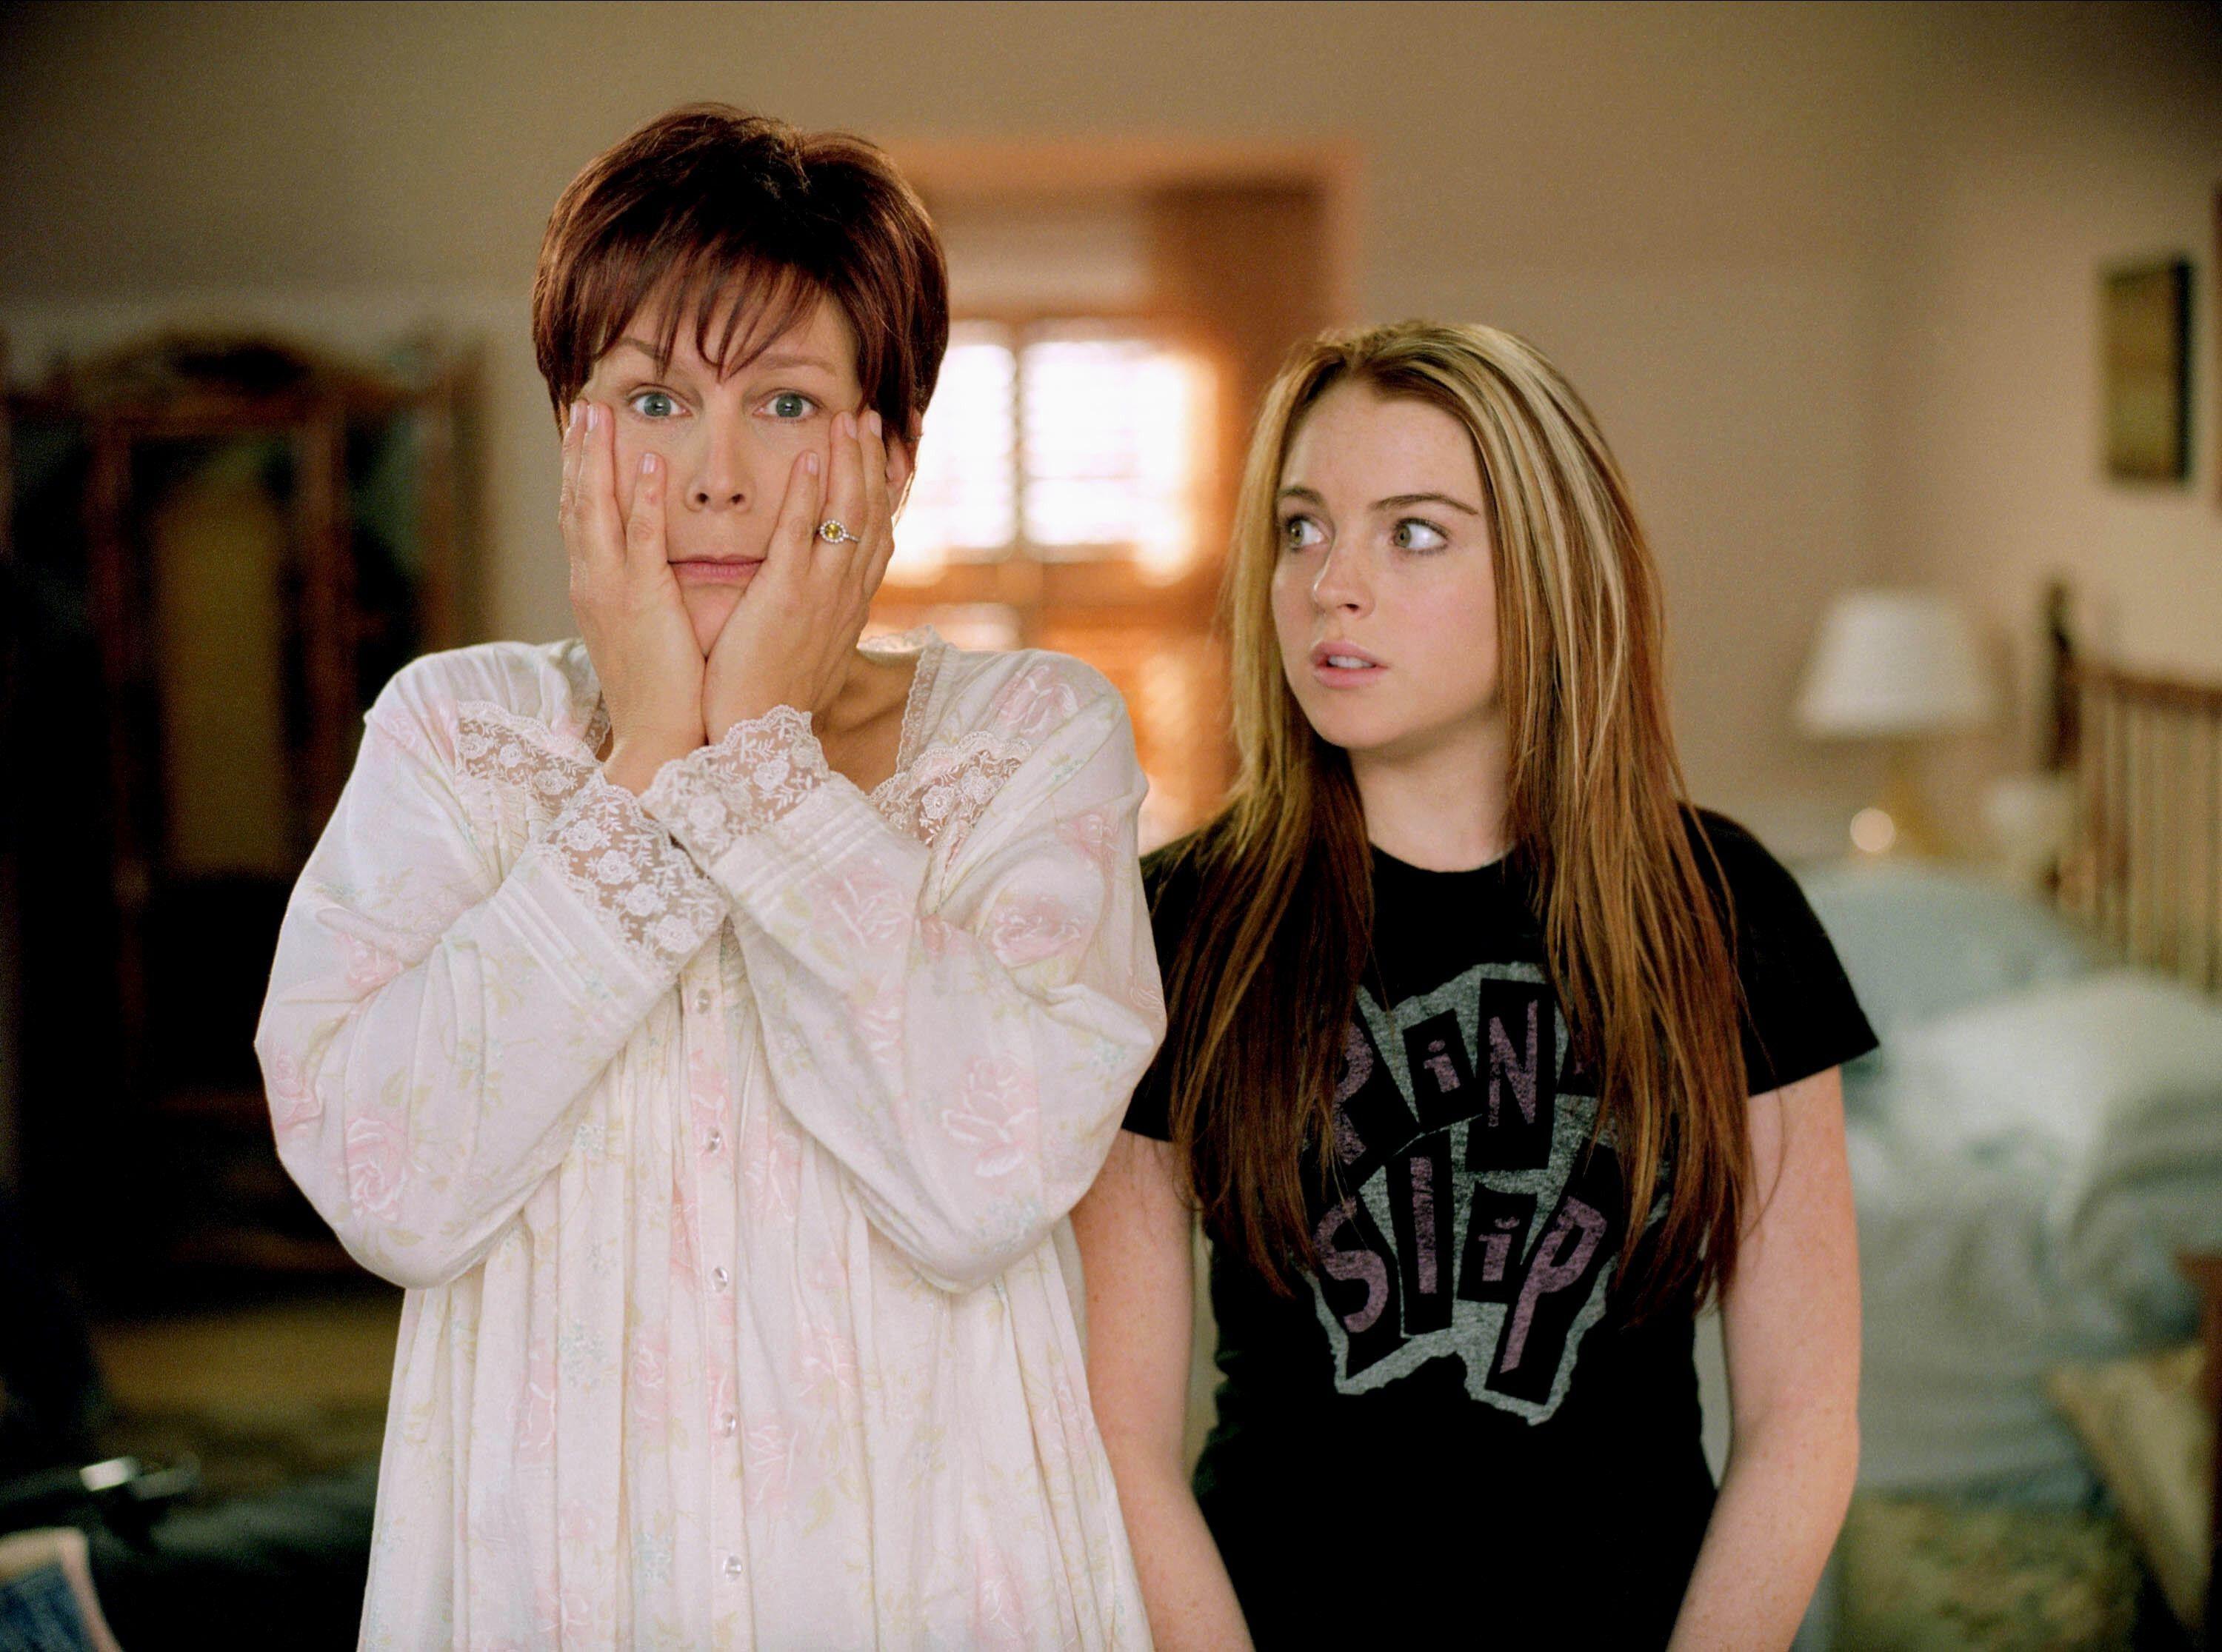 Jamie Lee Curtis and Lindsay Lohan in Freaky Friday, which premiered in 2003